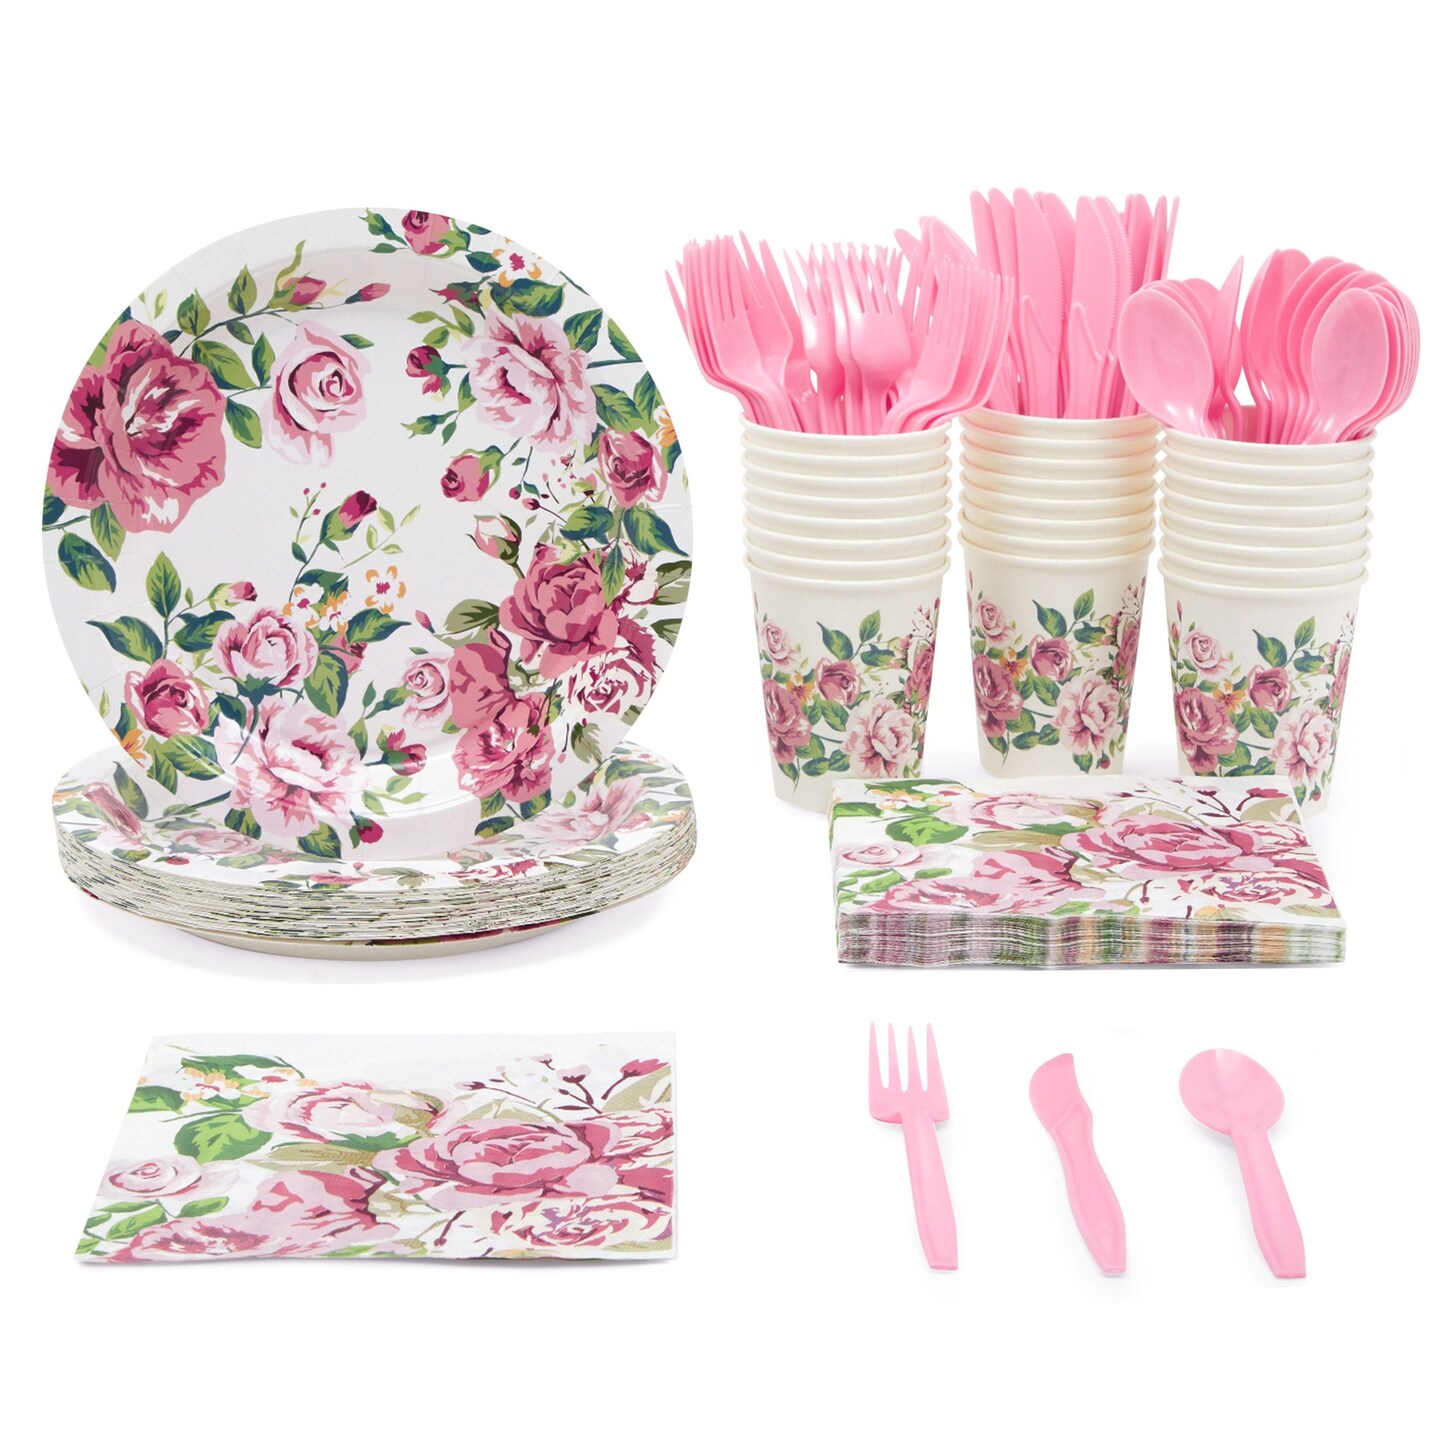 144 Piece Vintage Style Tea Party Supplies with Pink Floral Paper Plates,  Napkins, Cups, and Cutlery, Disposable Tableware Set for Girls Baby Shower,  Wedding (Serves 24)